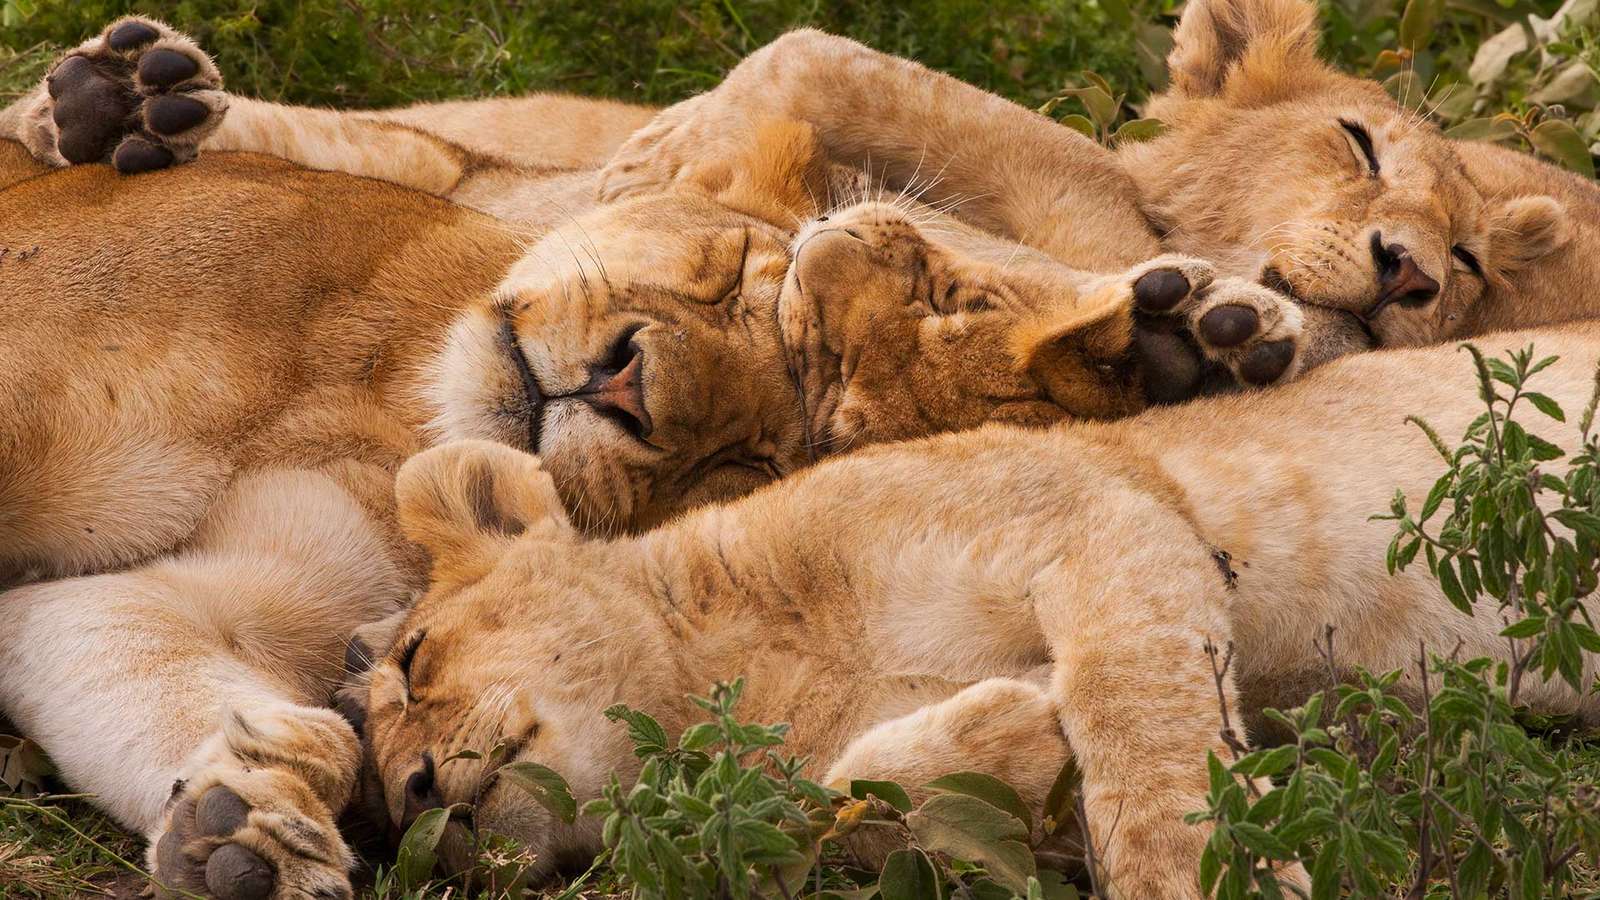 Lioness Nap Time puzzle online from photo